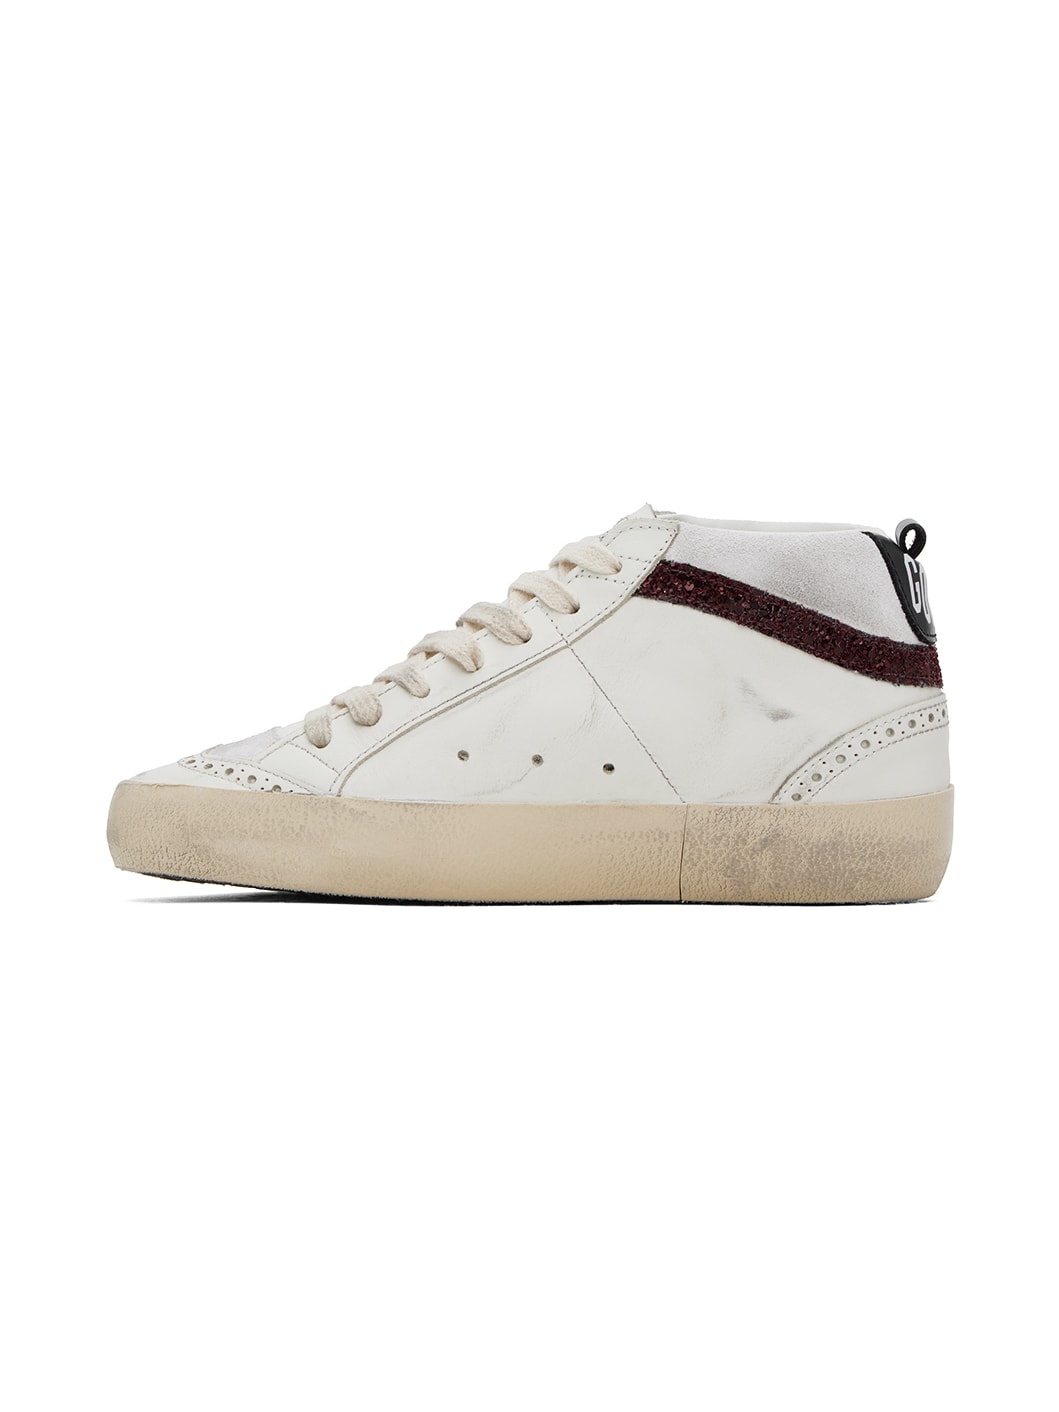 SSENSE Exclusive White Mid Star Sneakers - 3